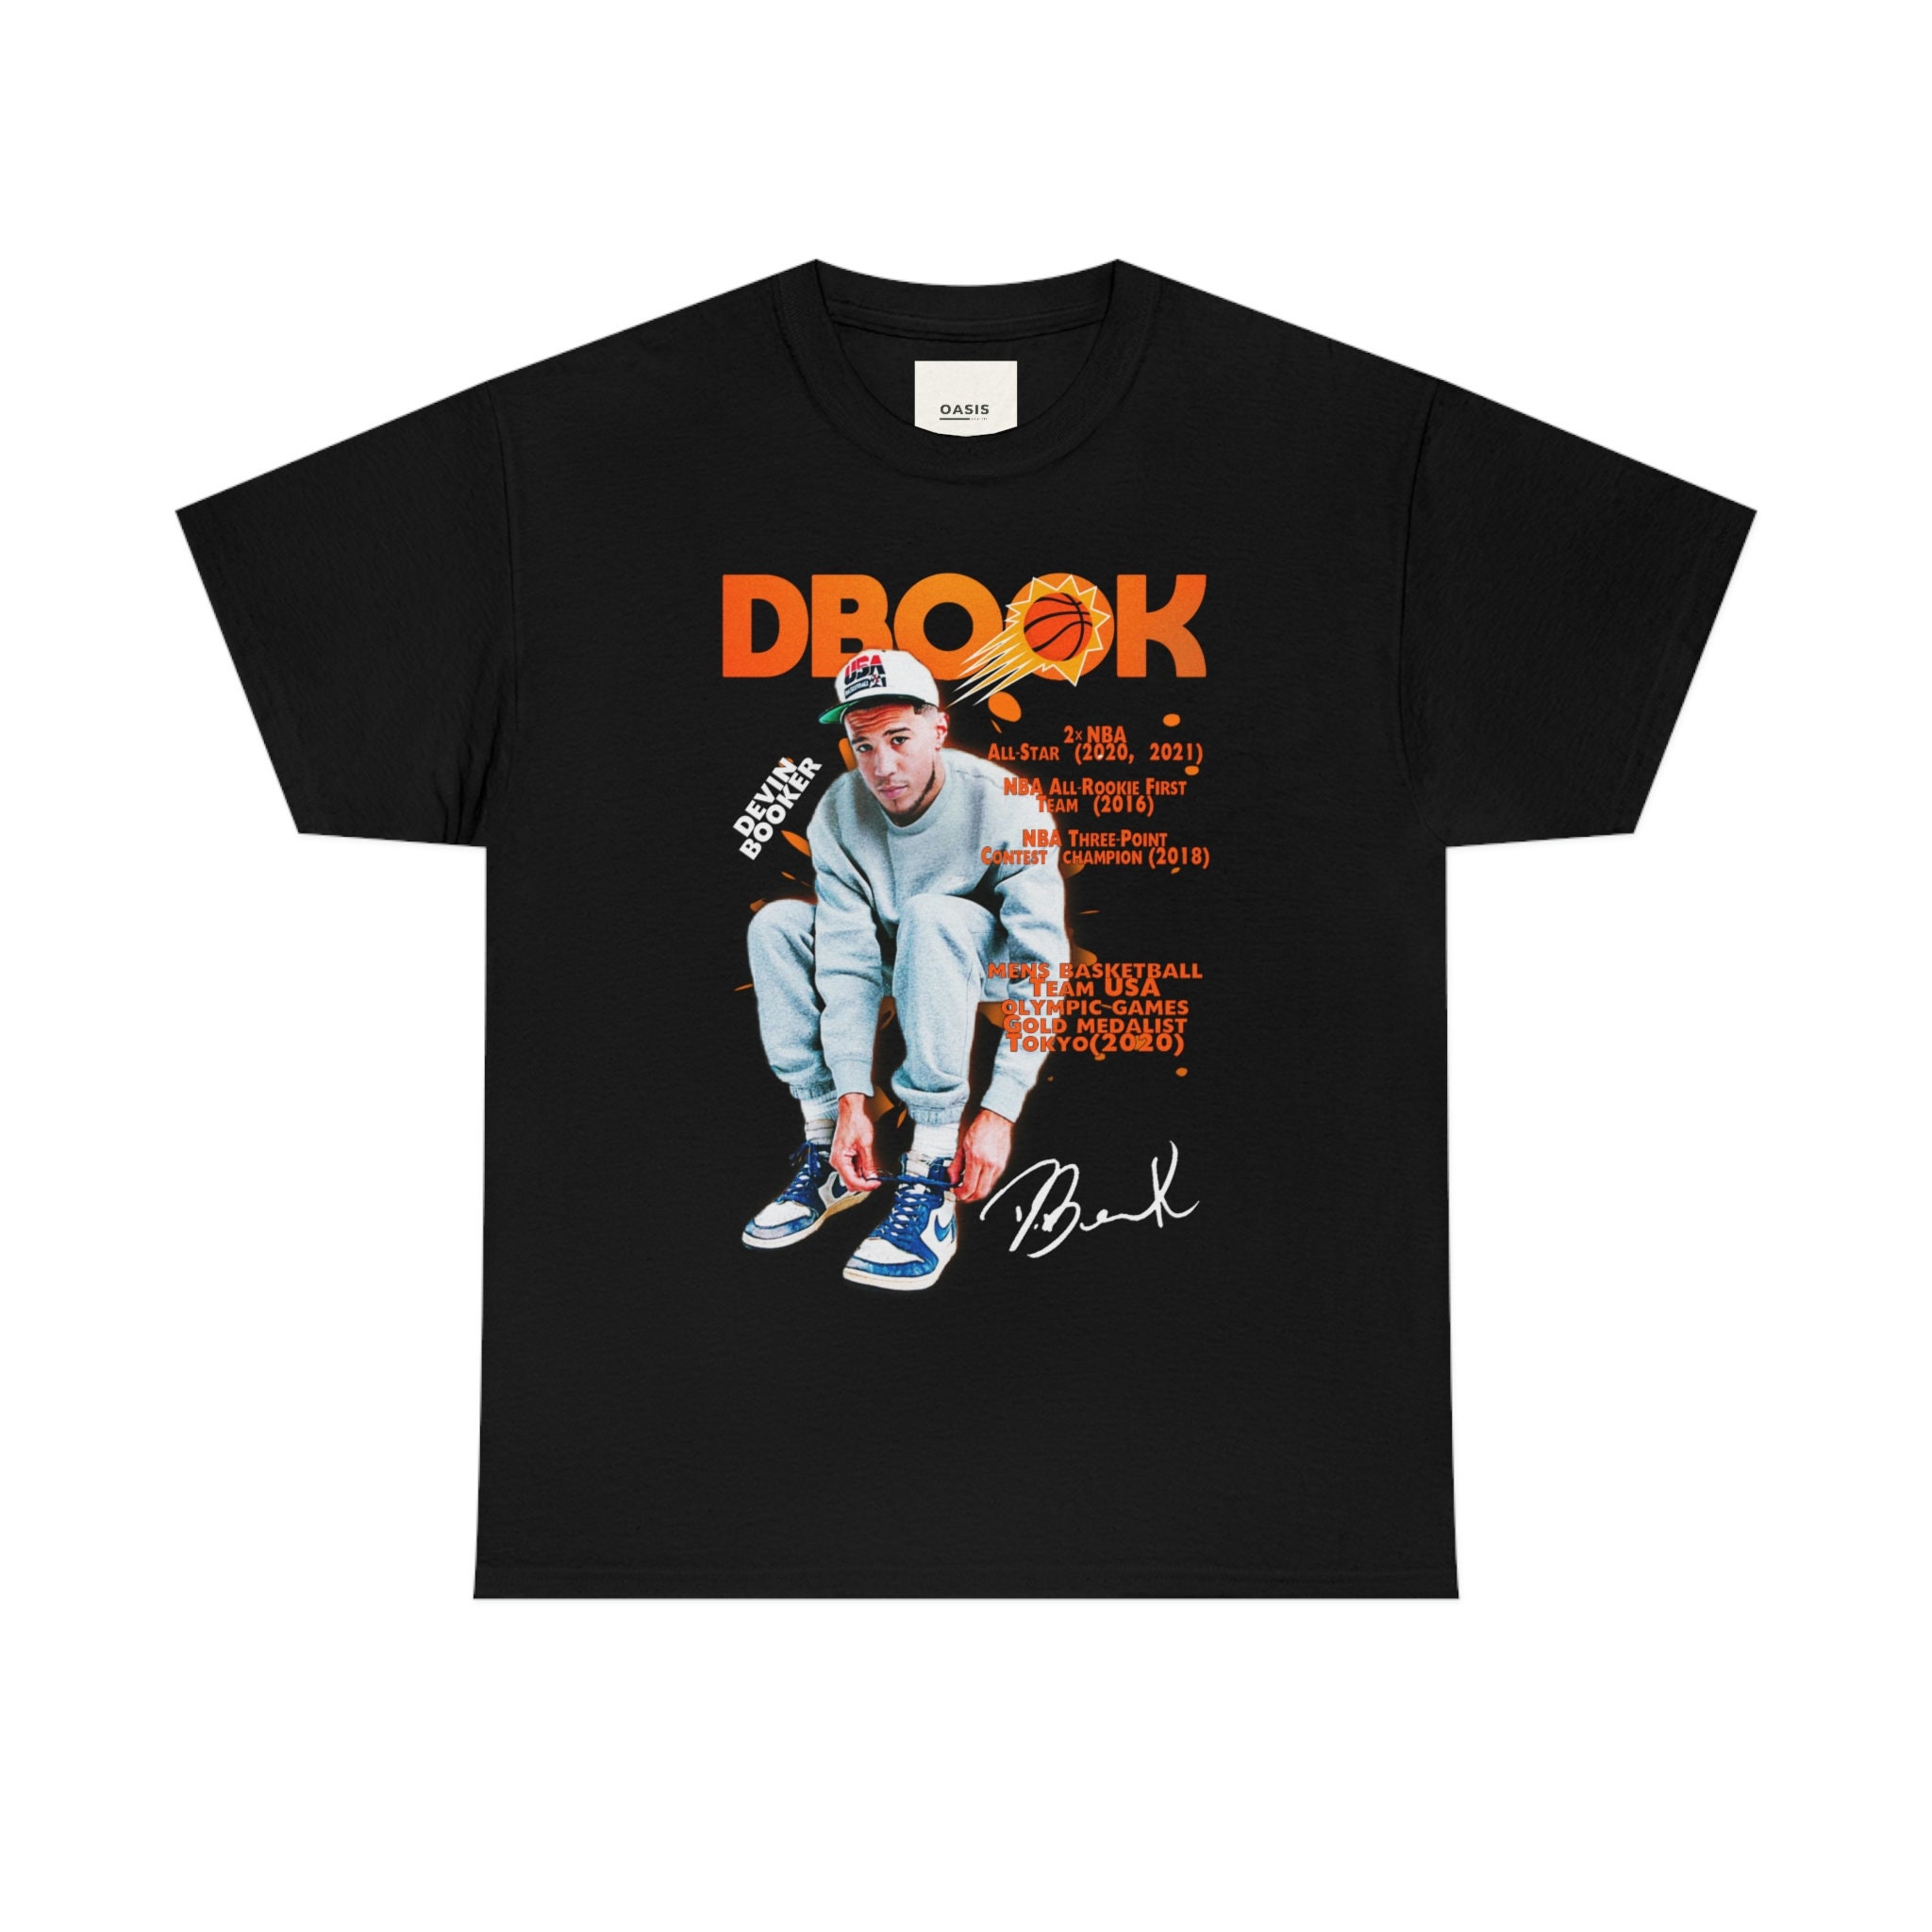 DEVIN BOOKER PHOENIX SUNS SON OF THE VALLEY GRAPHIC T-SHIRT - Prime Reps